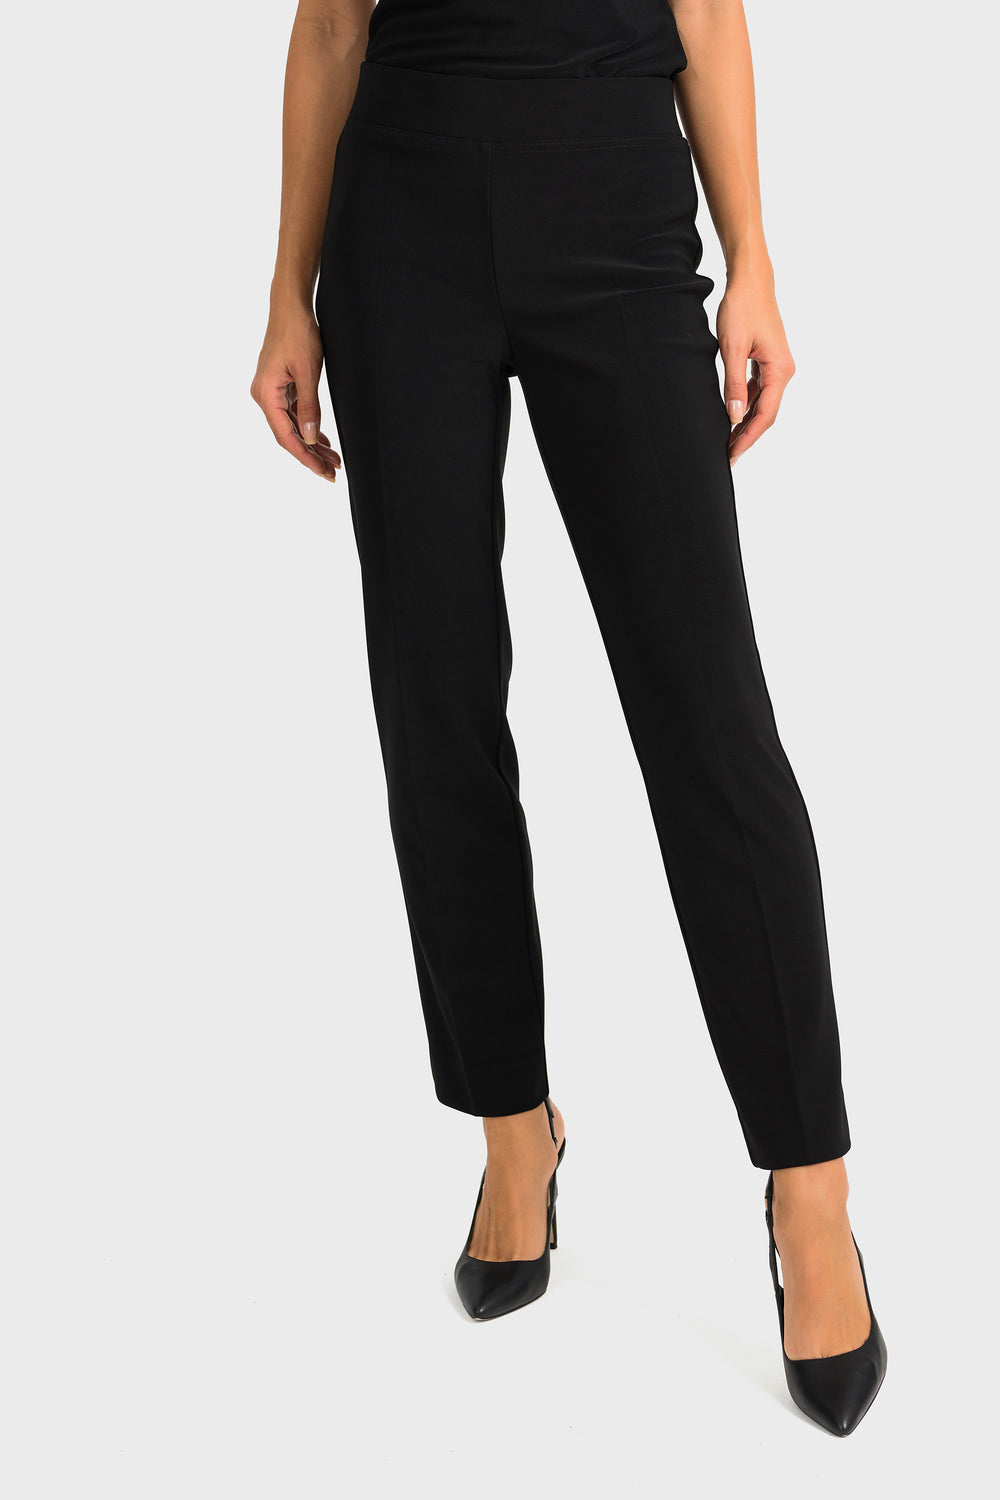 Joseph Ribkoff women's business casual slim fit basic pull-on pant - black front